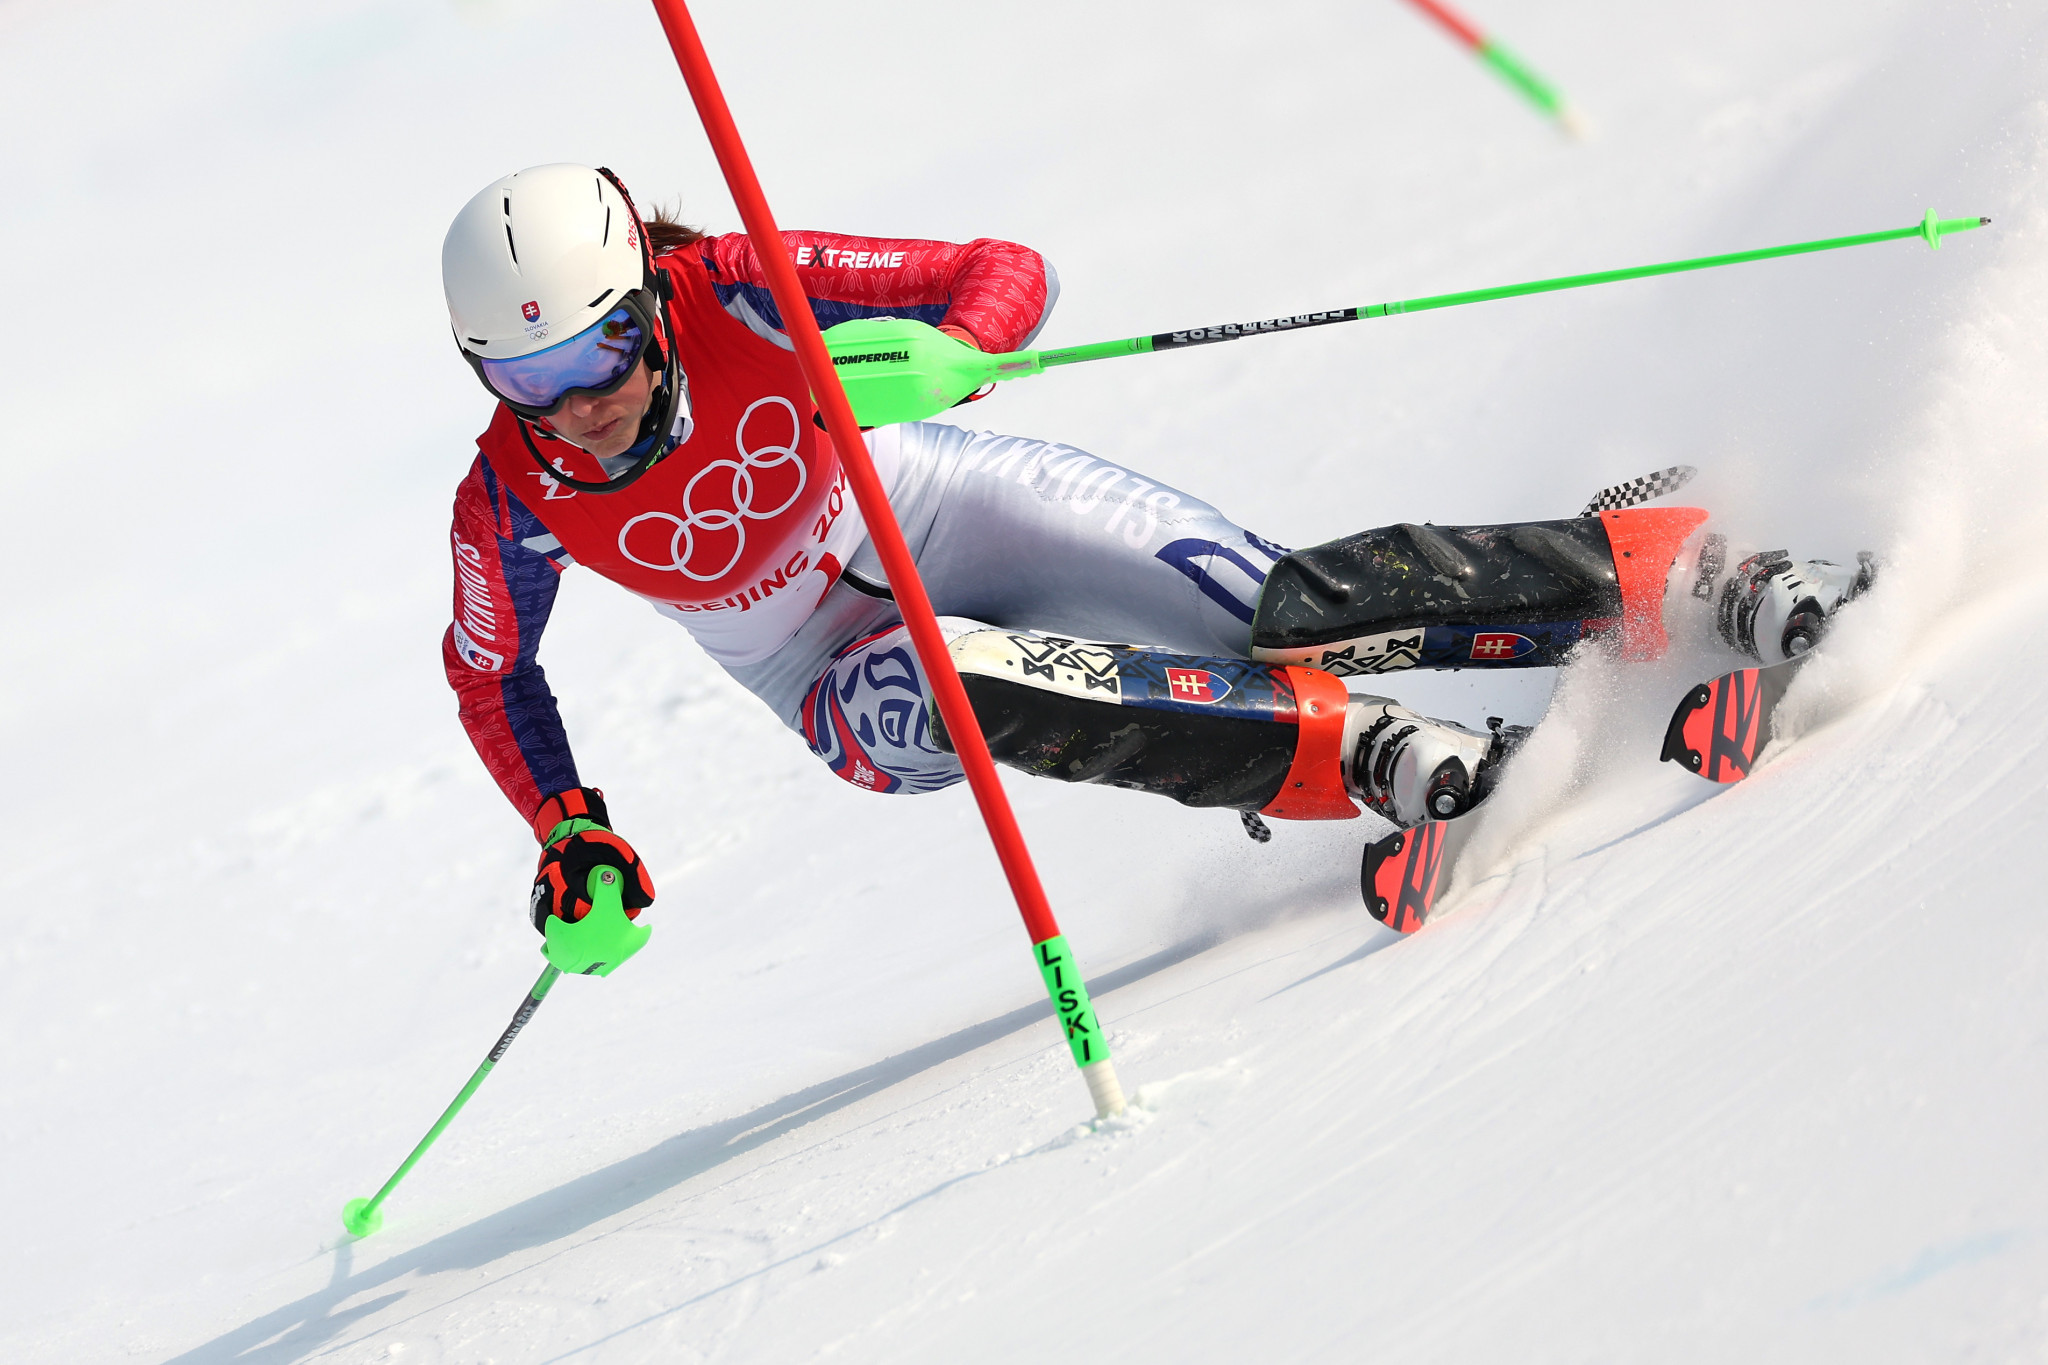 Slovakia’s Petra Vlhová triumphed in the women's slalom competition ©Getty Images